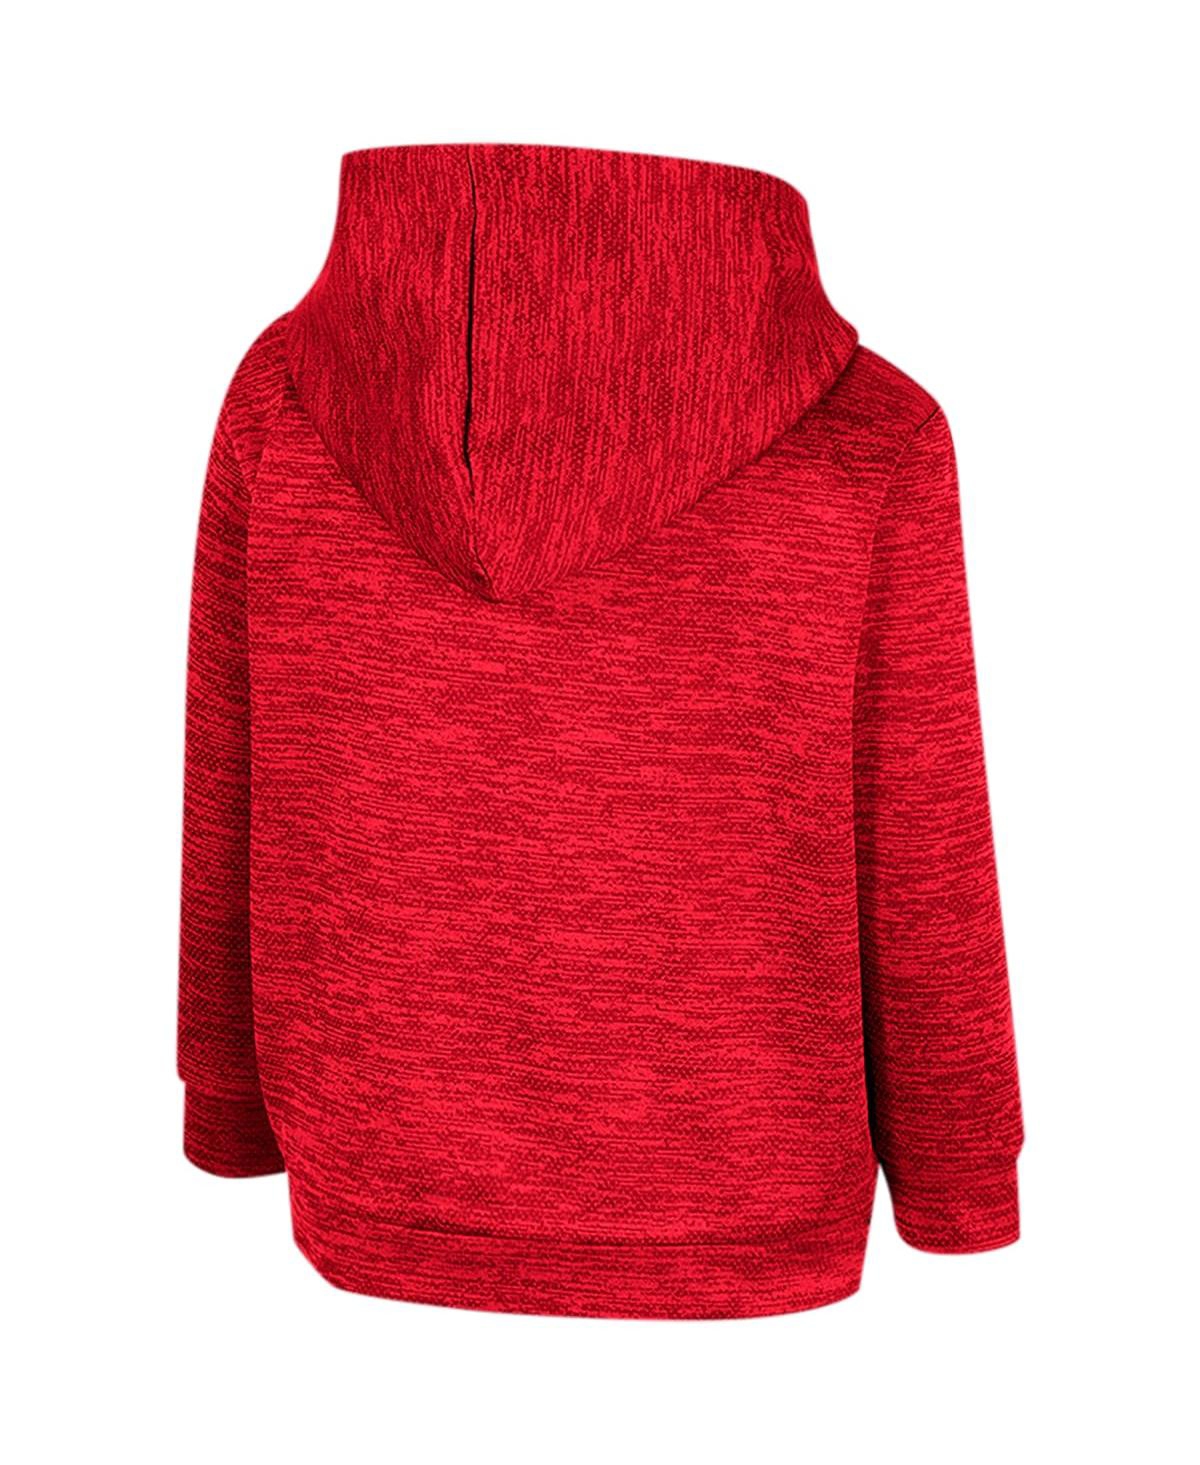 Shop Colosseum Toddler Boys And Girls  Red Wisconsin Badgers Live Hardcore Pullover Hoodie